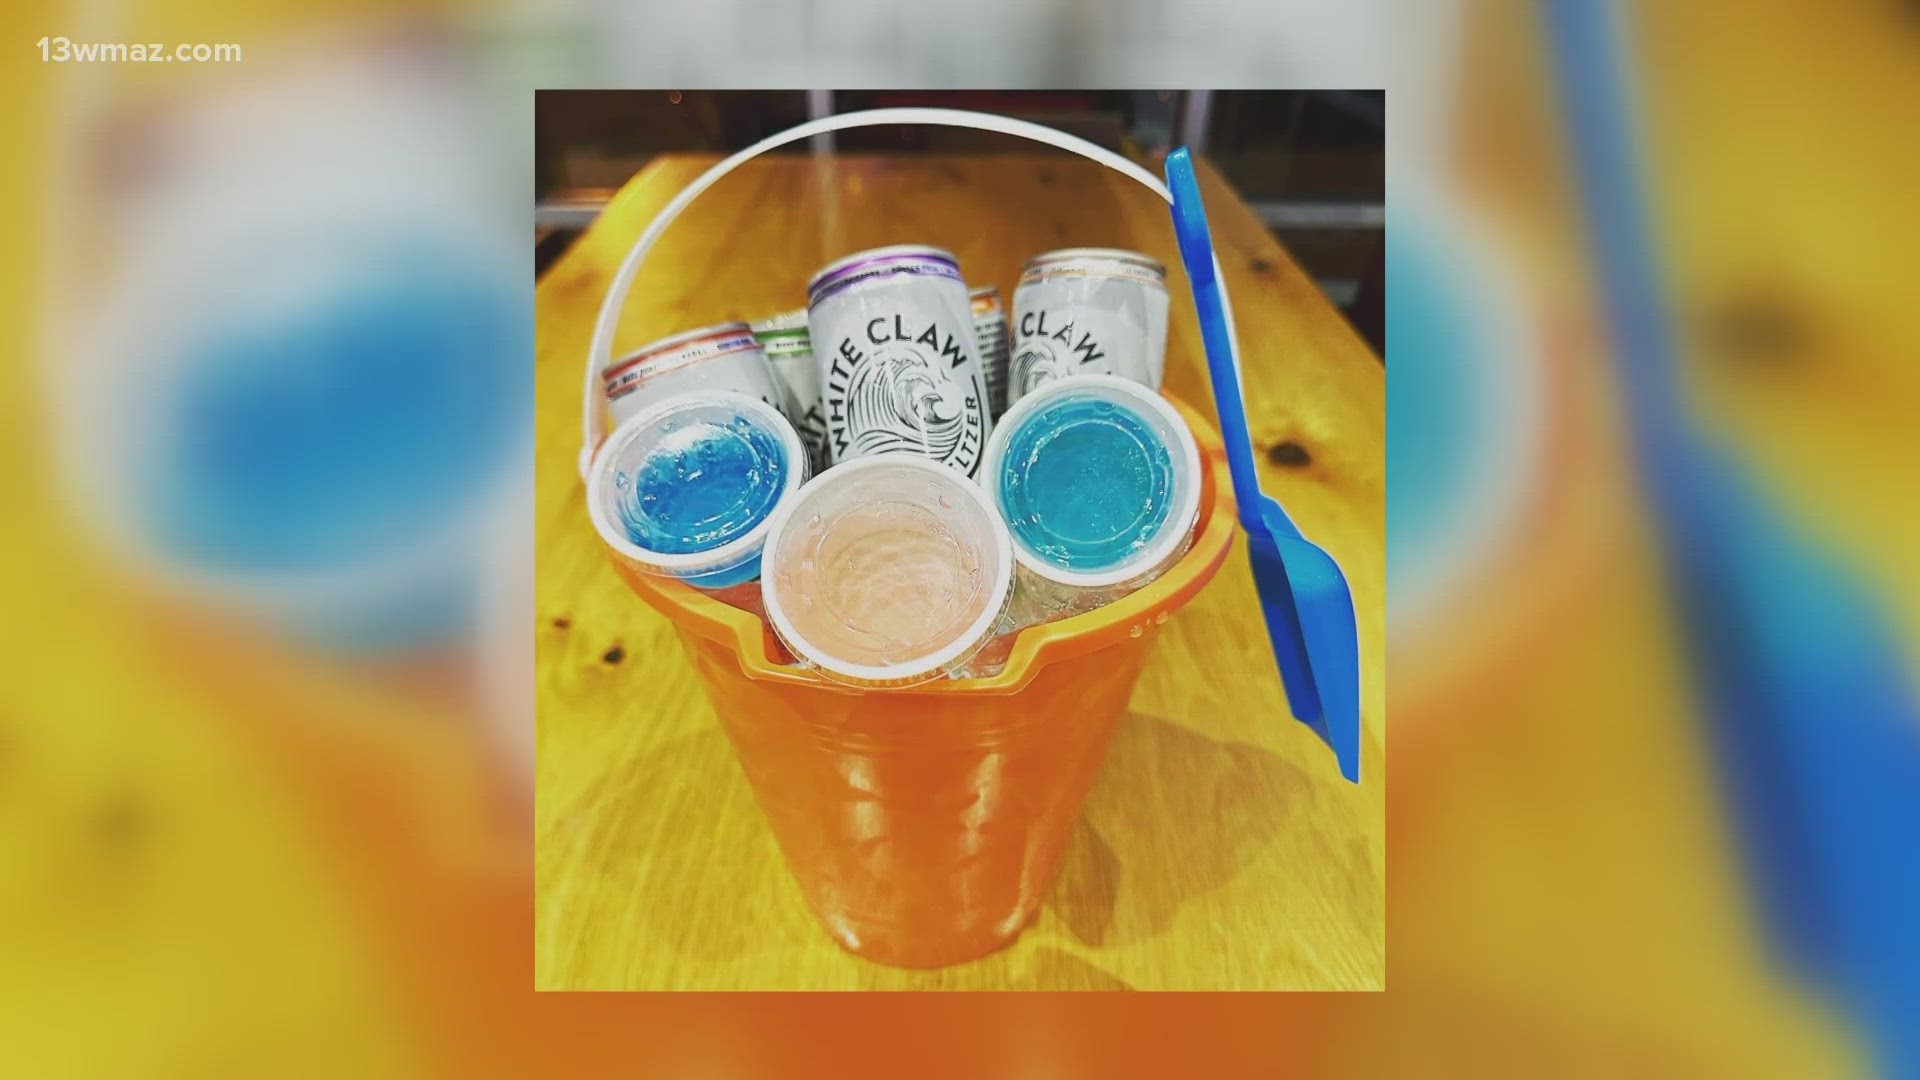 Central Georgia is heating up, and several places have released special cocktails to help folks cool off this summer.